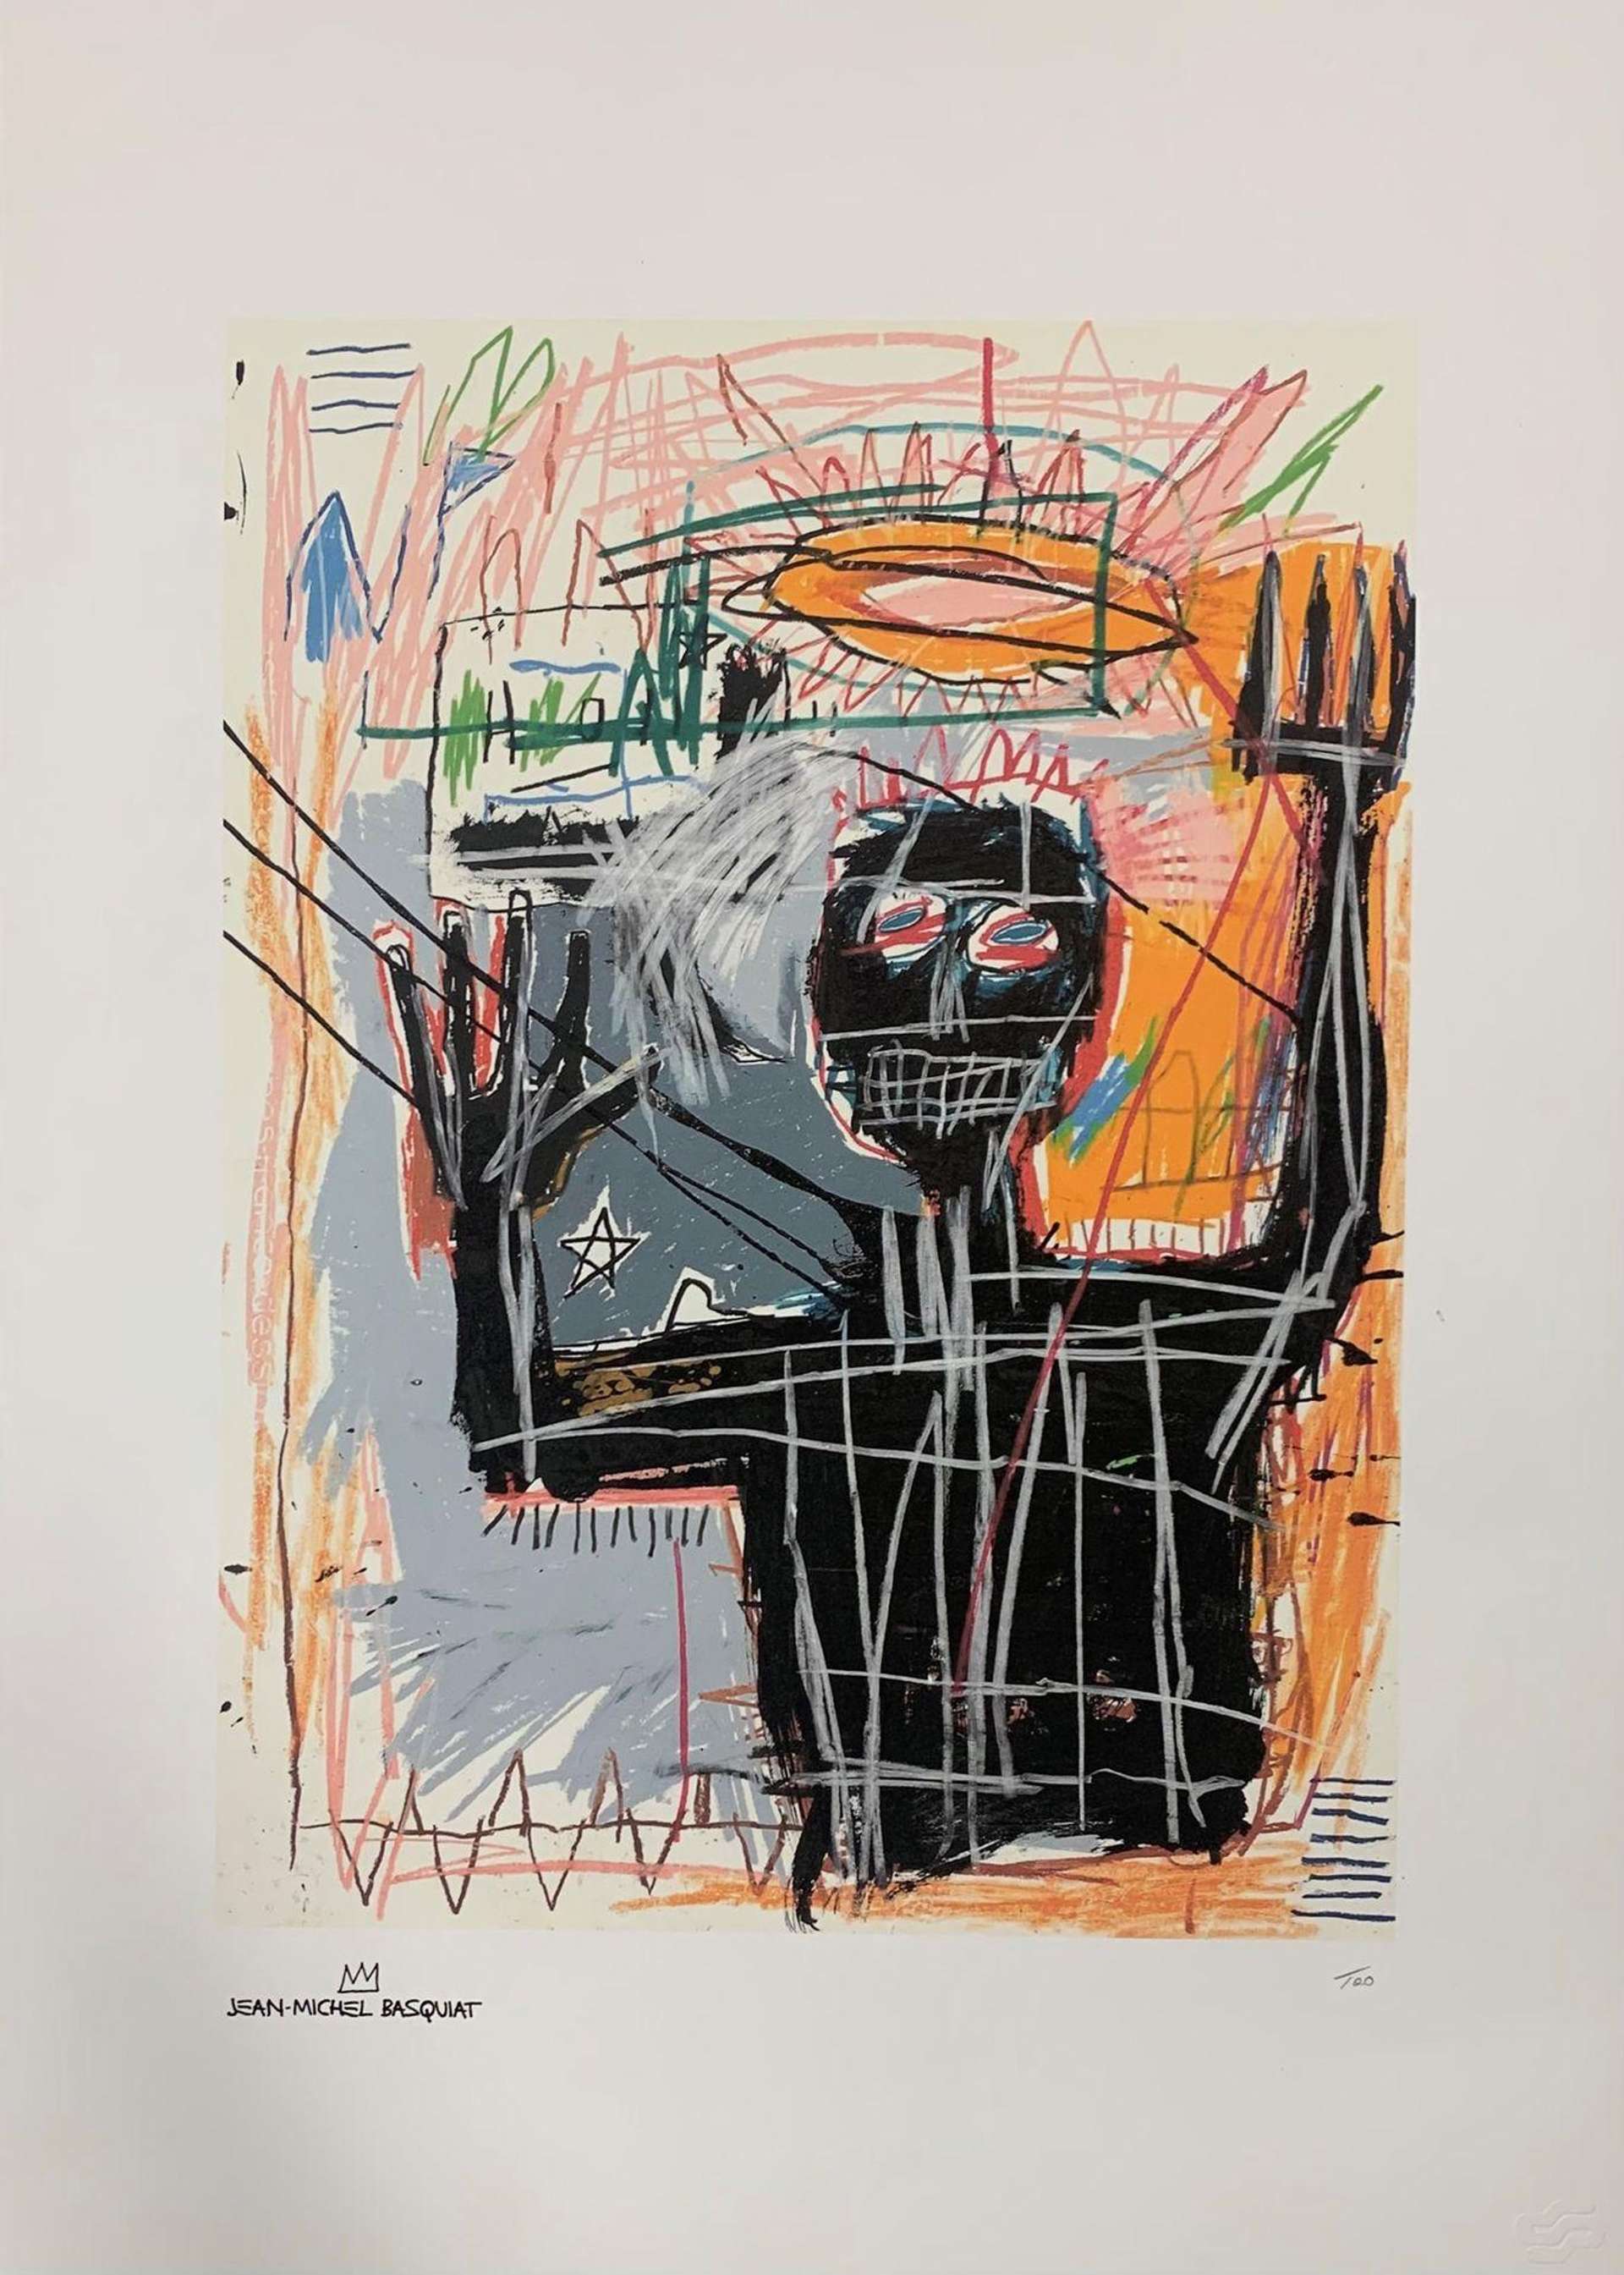 A Jean-Michel Basquiat screenprint of an abstracted black figure with scribbled facial features, raising both hands up in the air. The artwork is set against a scribbled background in various colours.